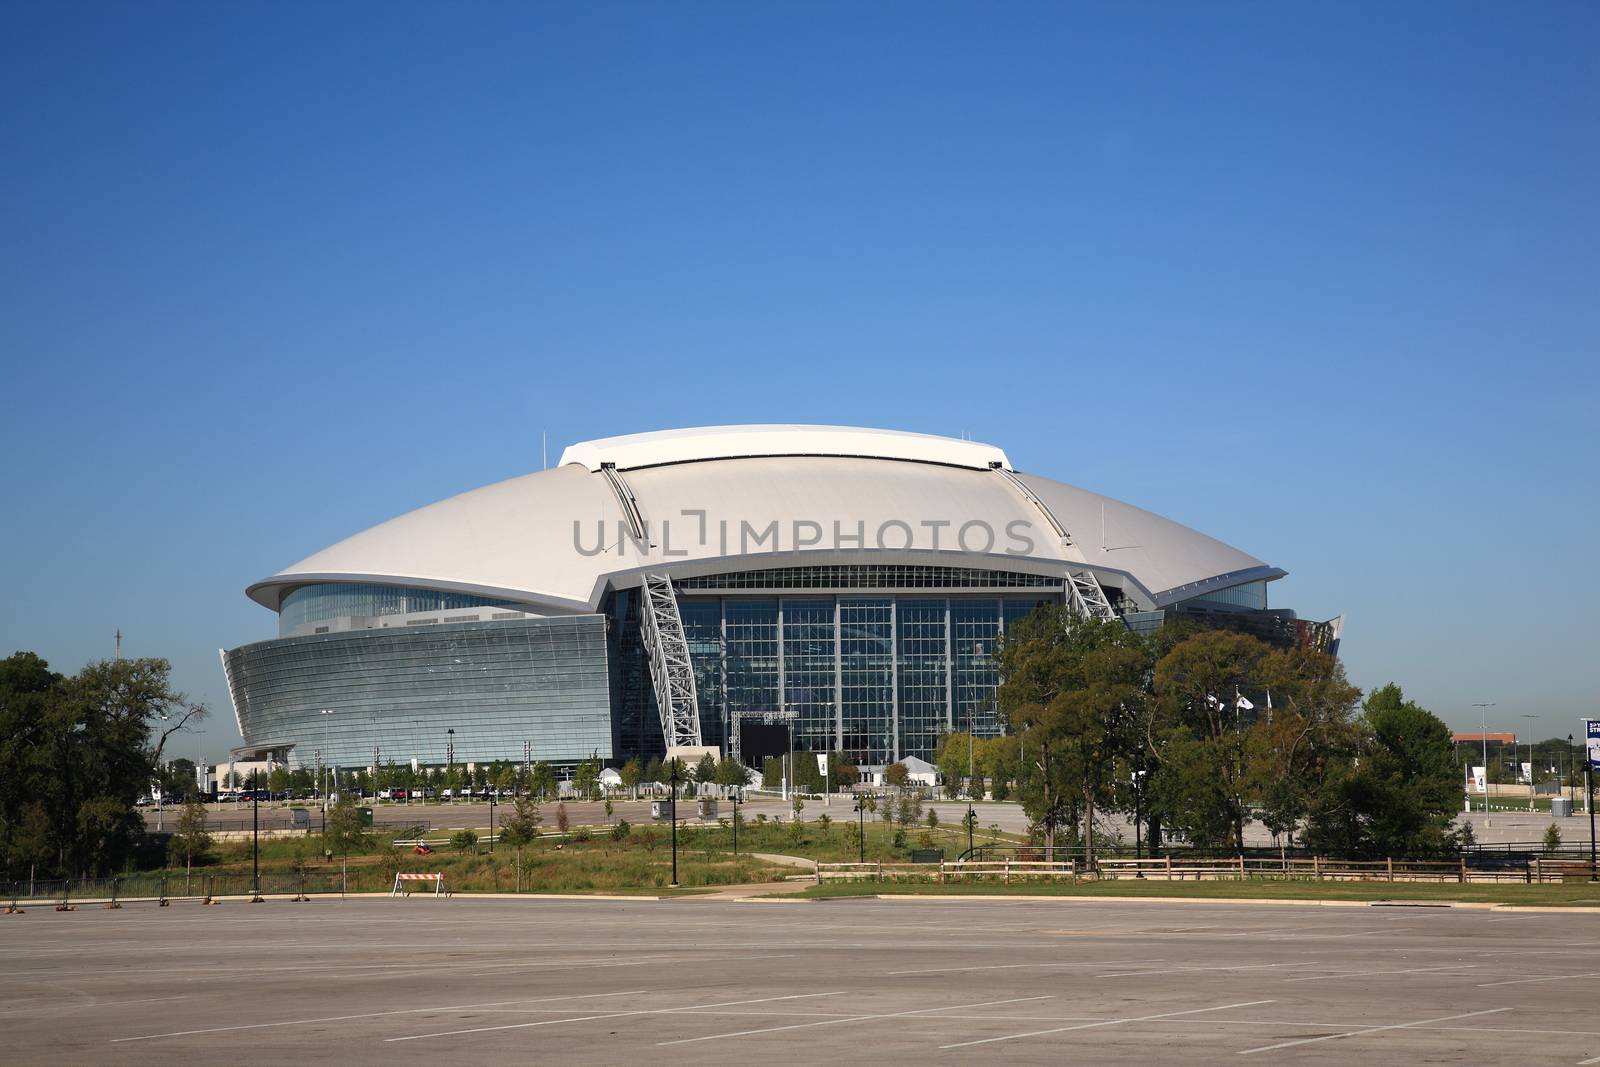 Dallas Cowboys AT&T Stadium by Ffooter